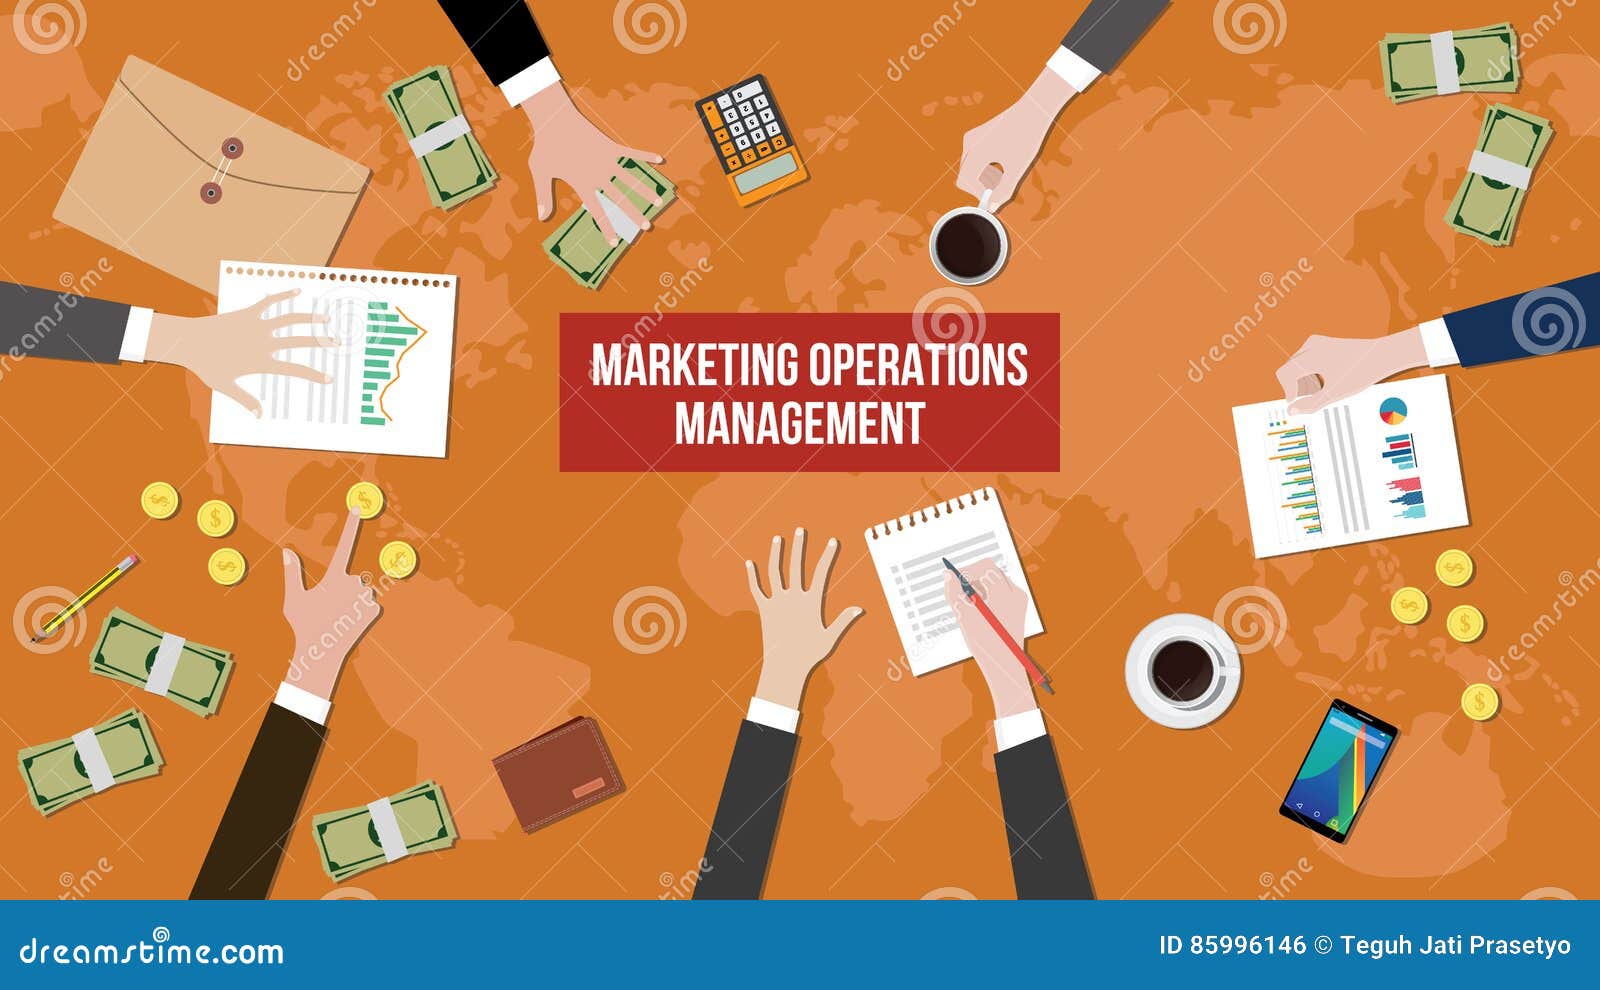 discussion about marketing operations management on a meeting table  with paperworks, money and document